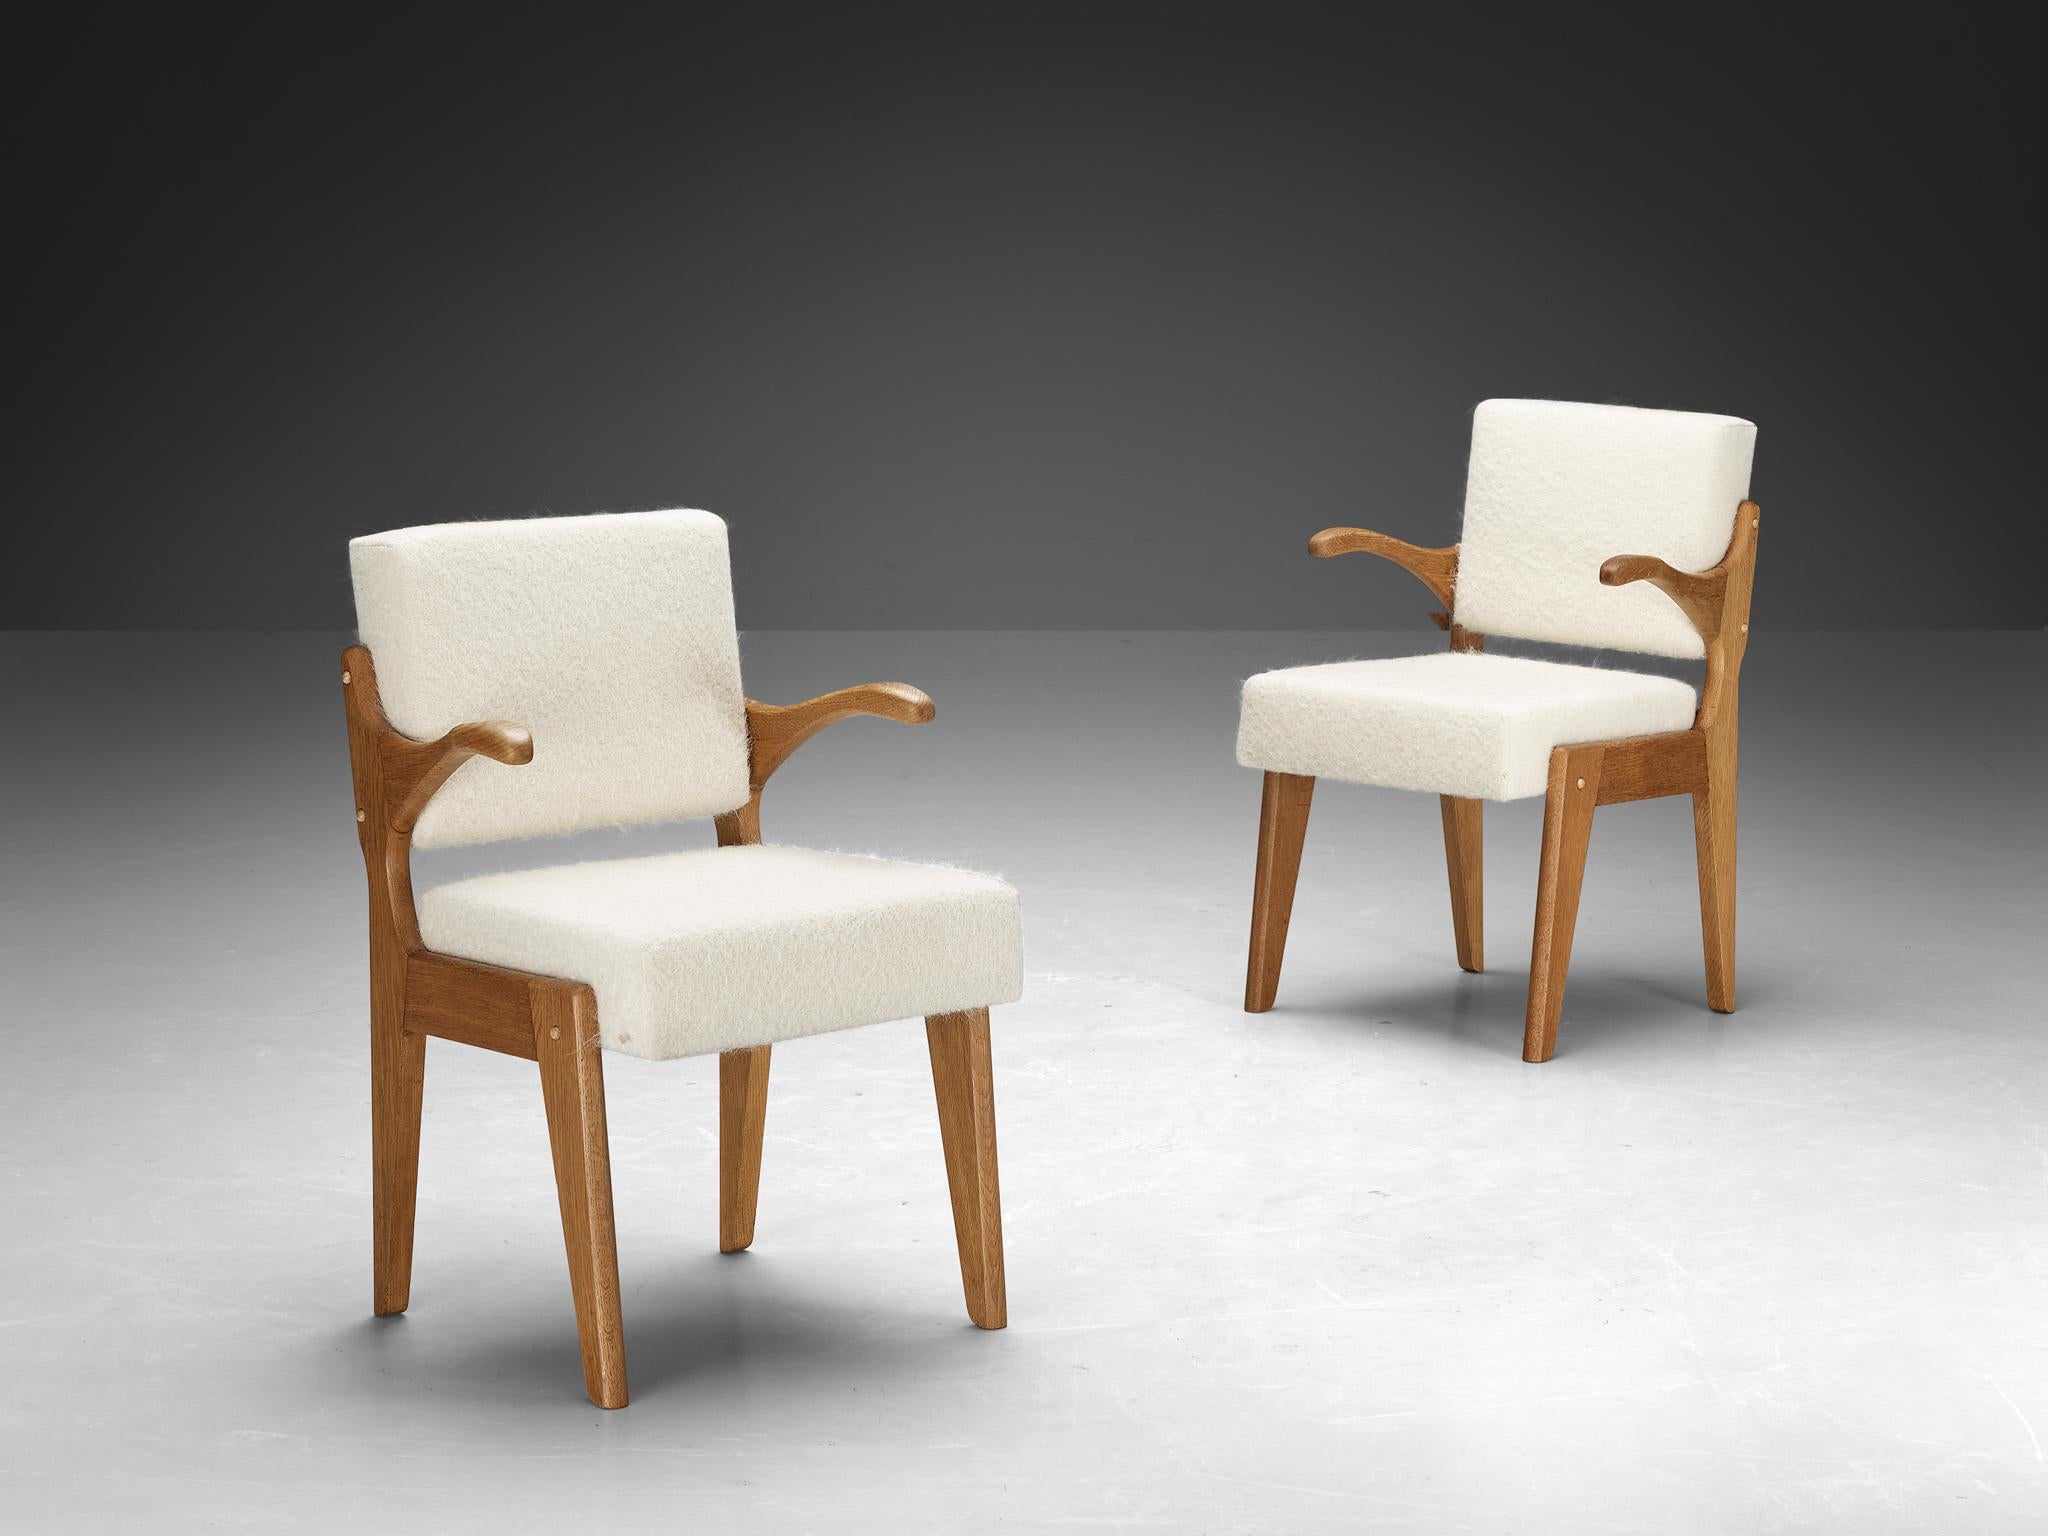 Guillerme et Chambron for Votre Maison, pair of 'Bridge Marius' armchairs, oak, fabric 'Suzon' Crème by Pierre Frey, France, 1960s

The Bridge Marius armchairs, crafted by the designer duo Jacques Chambron and Robert Guillerme, stand as exquisite